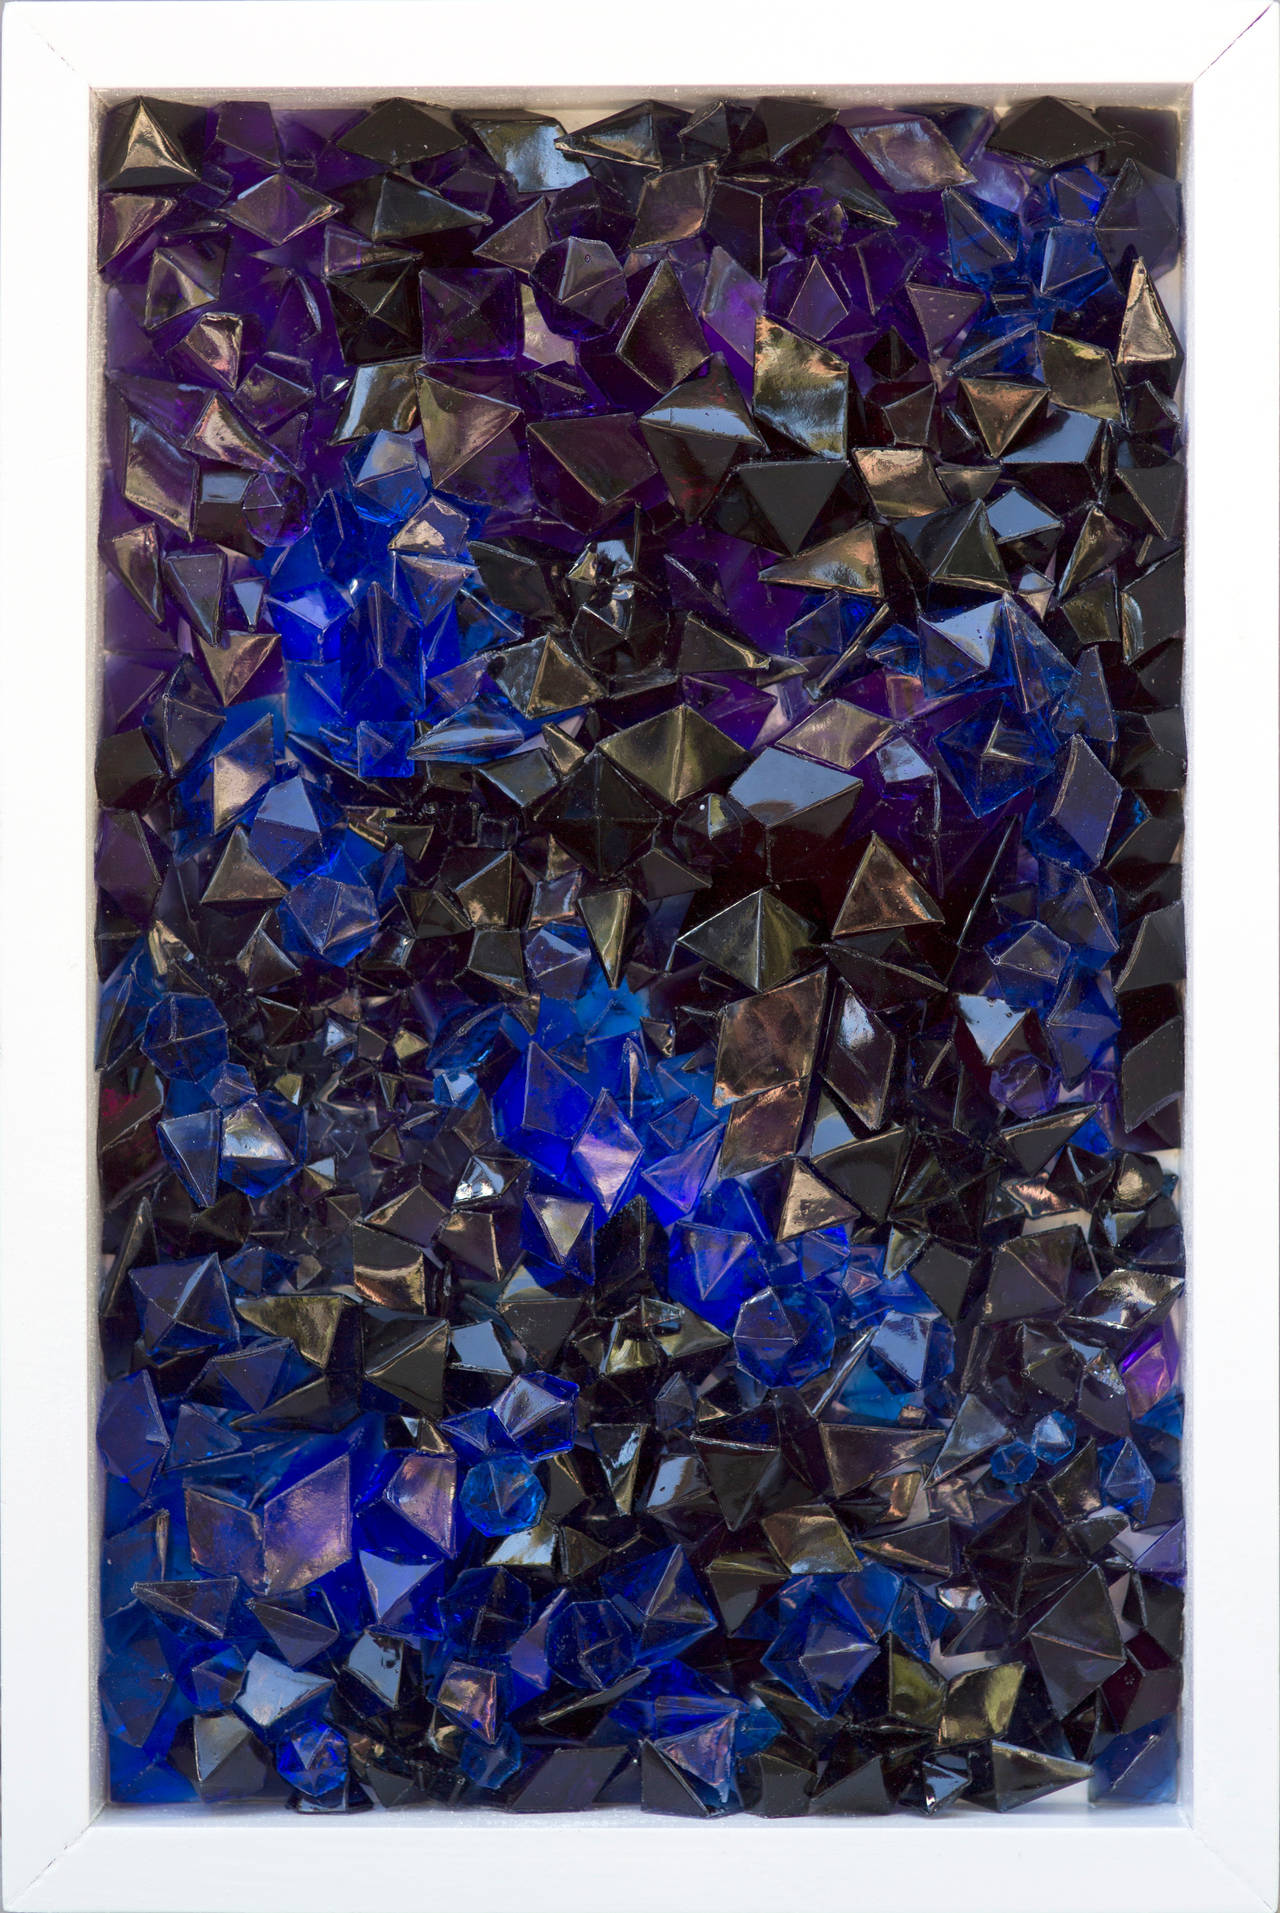 Paige Smith (A Common Name) Abstract Sculpture - "Ut Tenebras" dimensional, geode motif, wall hanging sculpture